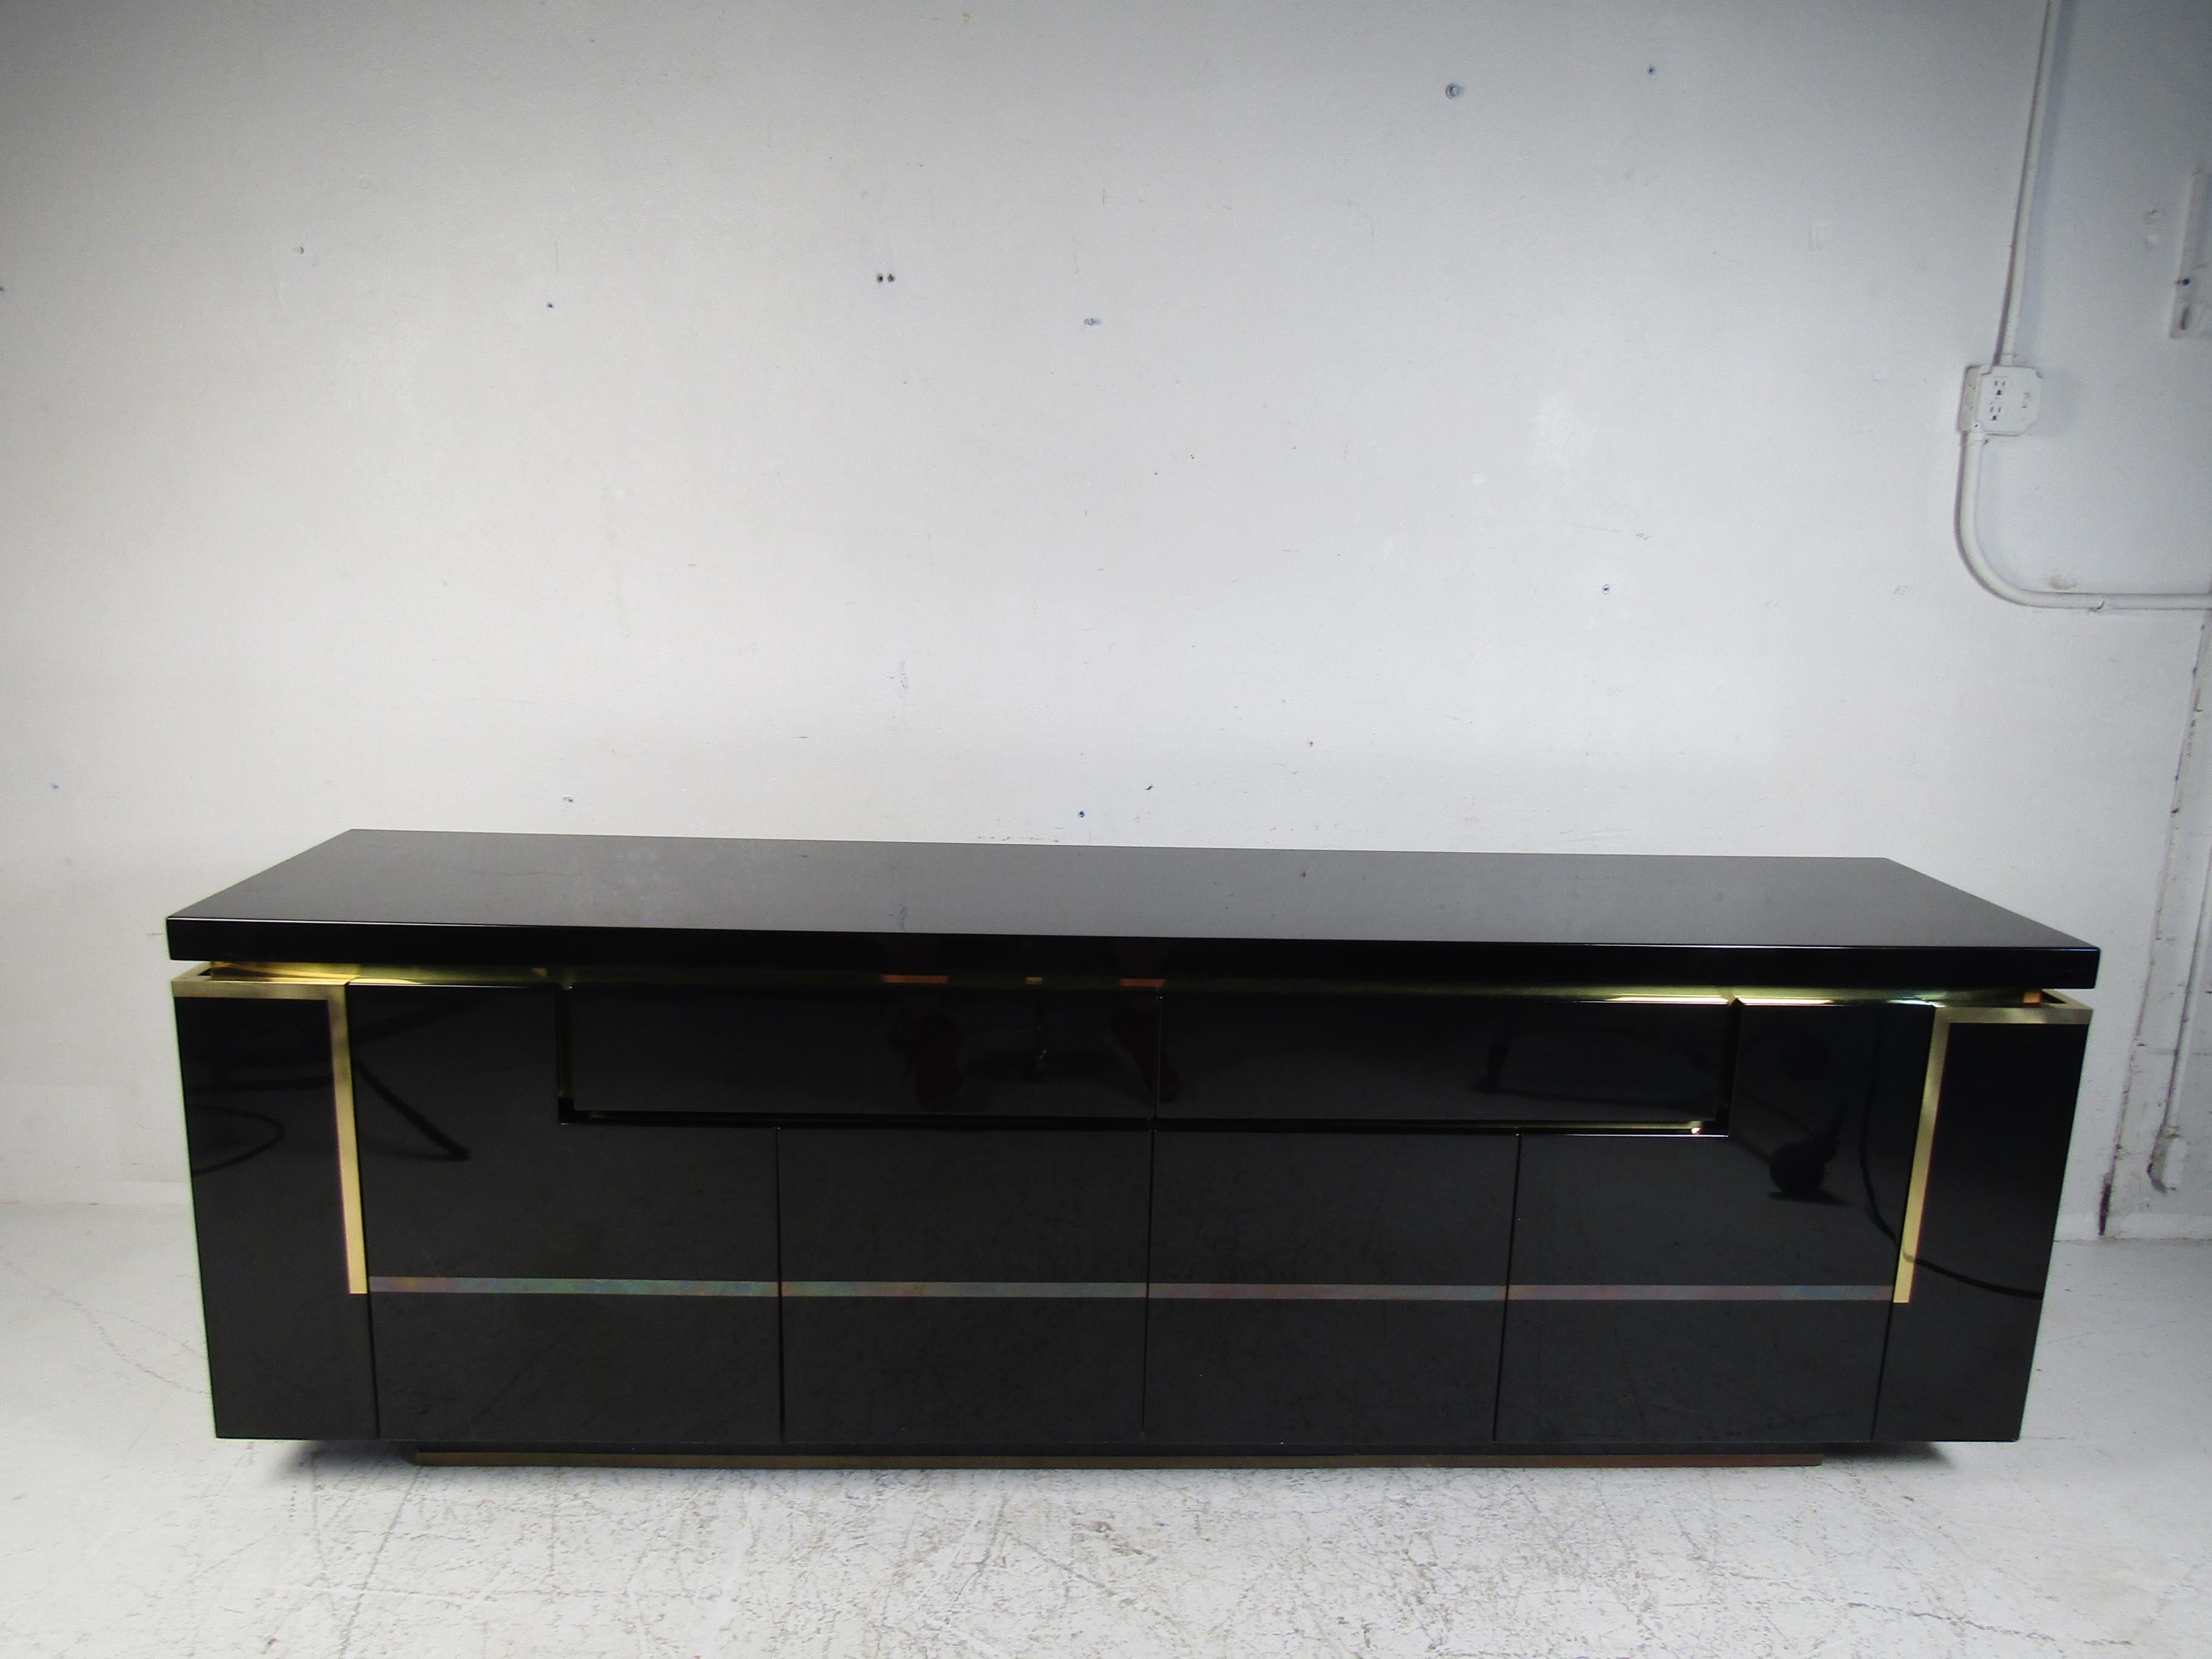 This stunning modern sideboard offers plenty of room for storage within its many compartments. The unique design appears to have interlocking cabinets with the two drawers. The glossy black finish and brass trim add to the allure. A finished back